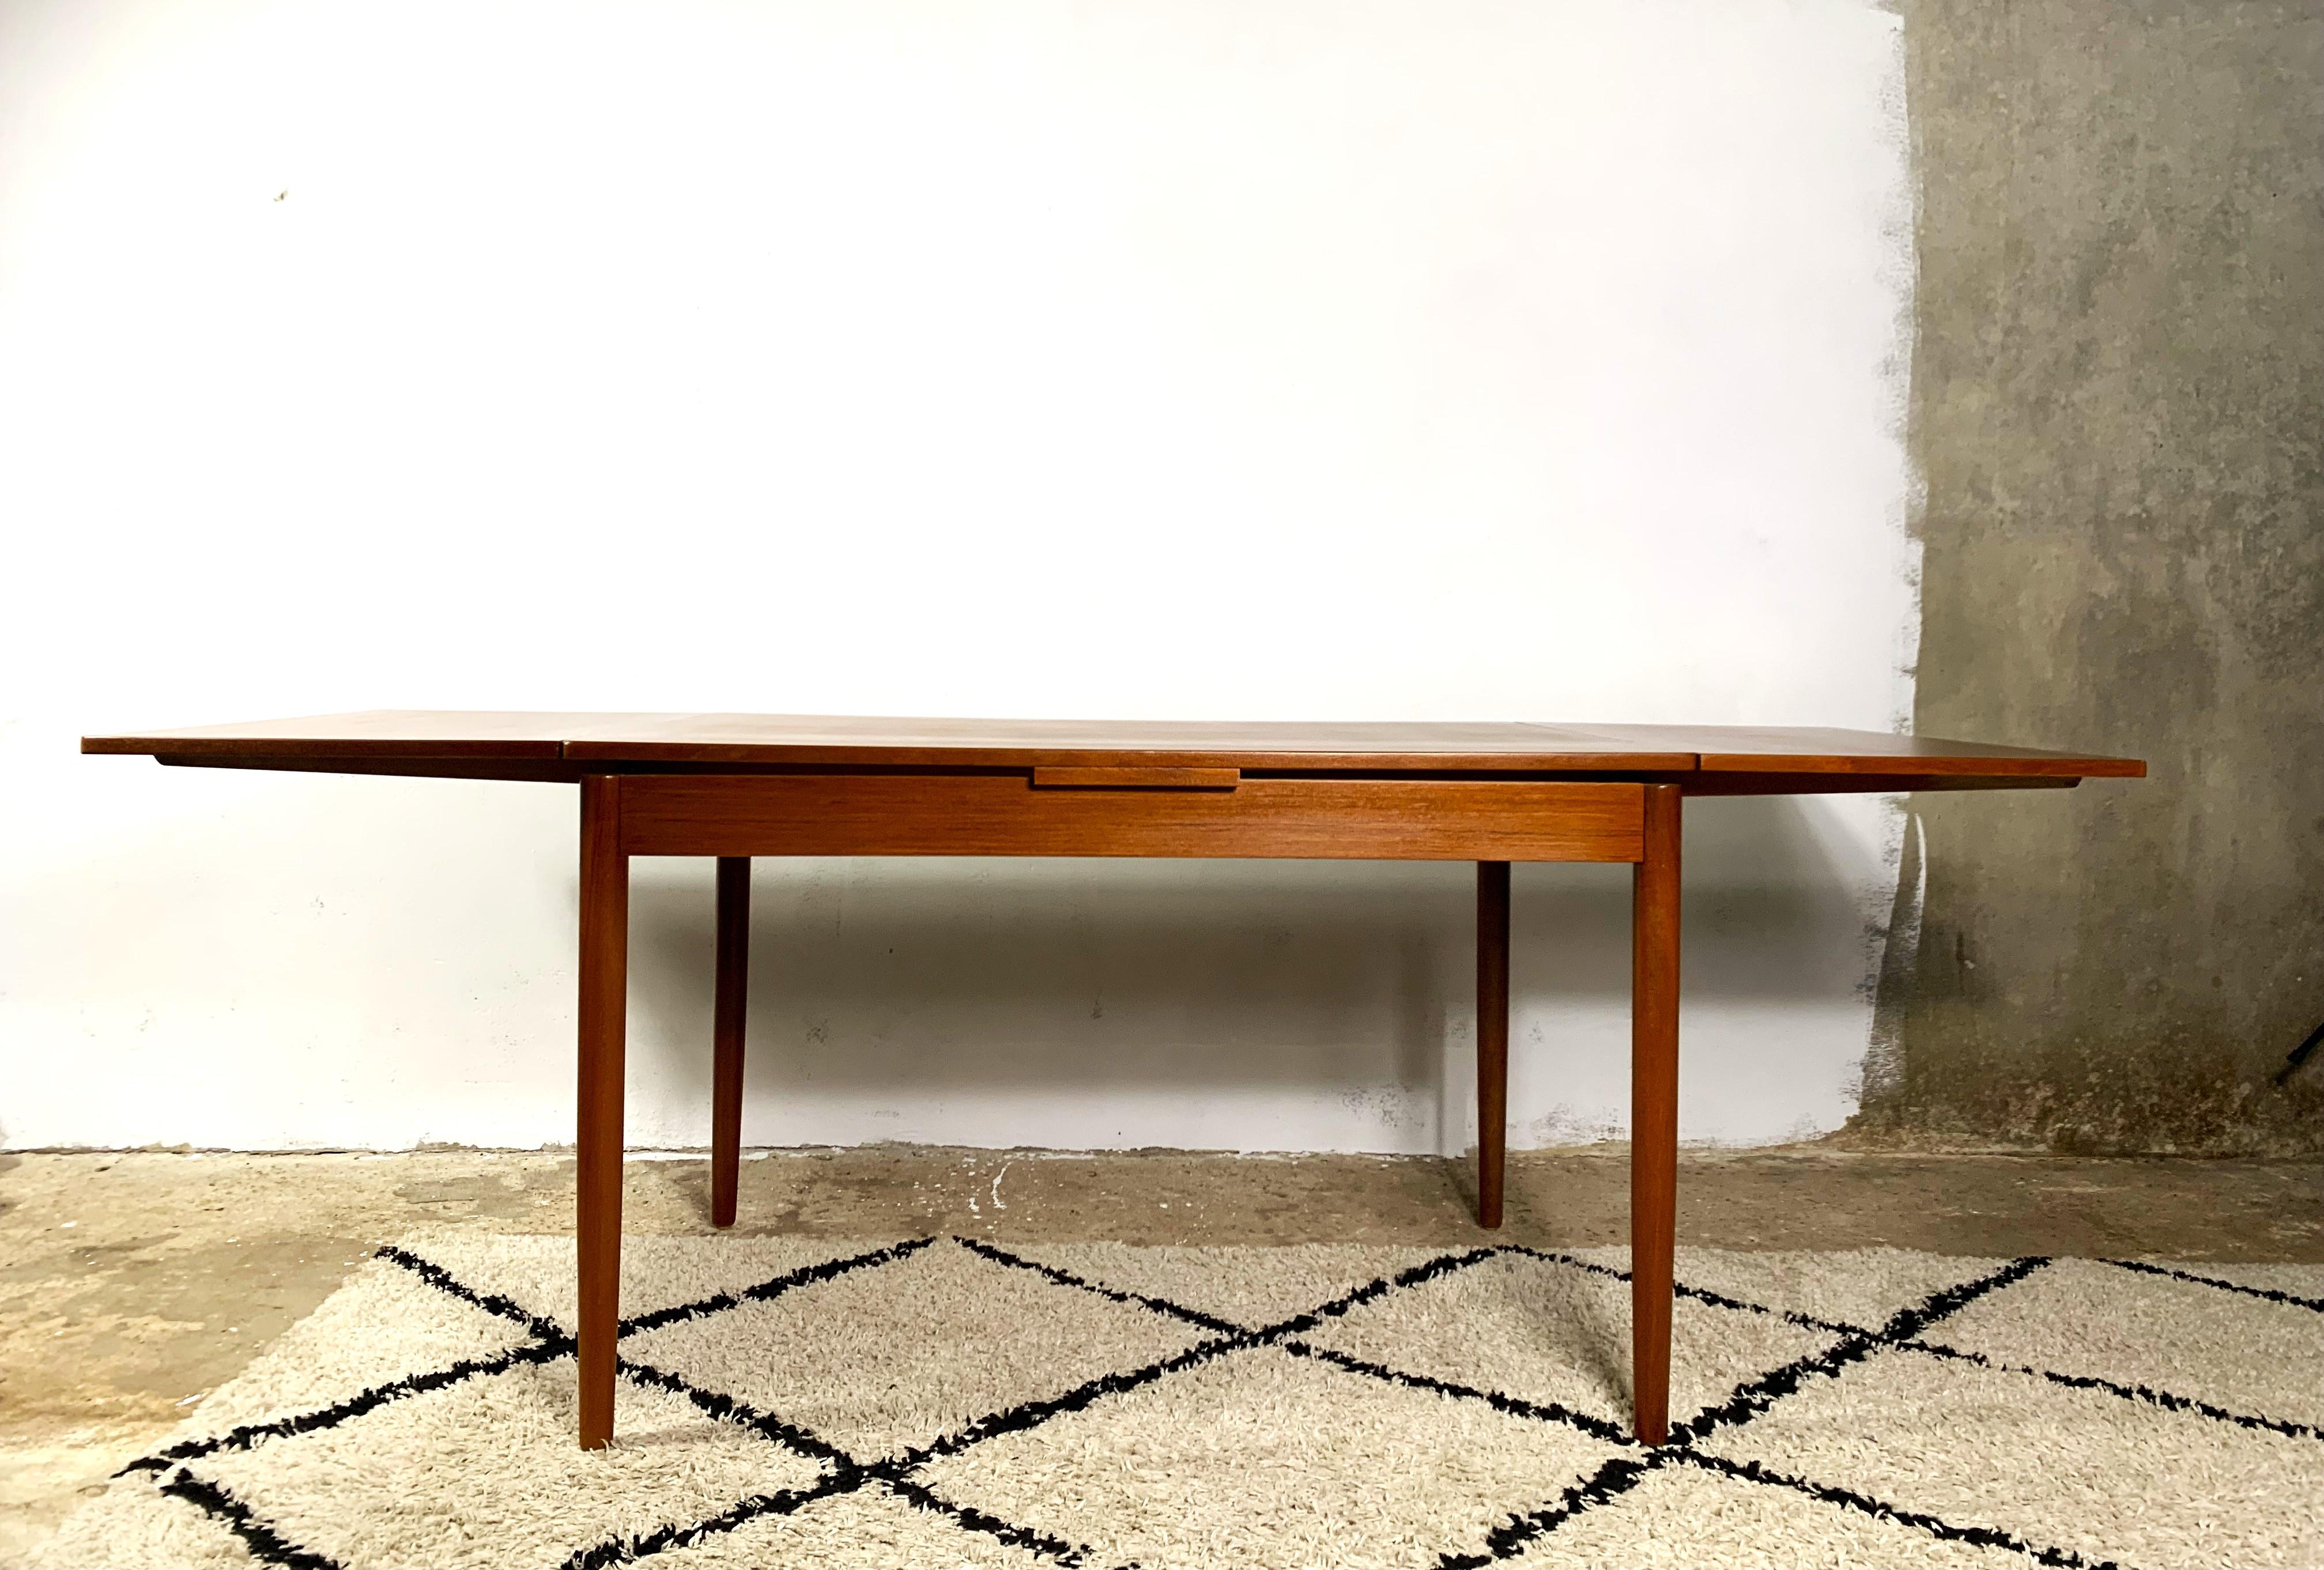 Teak dining table from Denmark, made in the 1960s/70s. The basic version can accommodate 6 people, the extended version can accommodate 8 or even 10 people. Assembling and disassembling the table is easy. The table top has been renovated and